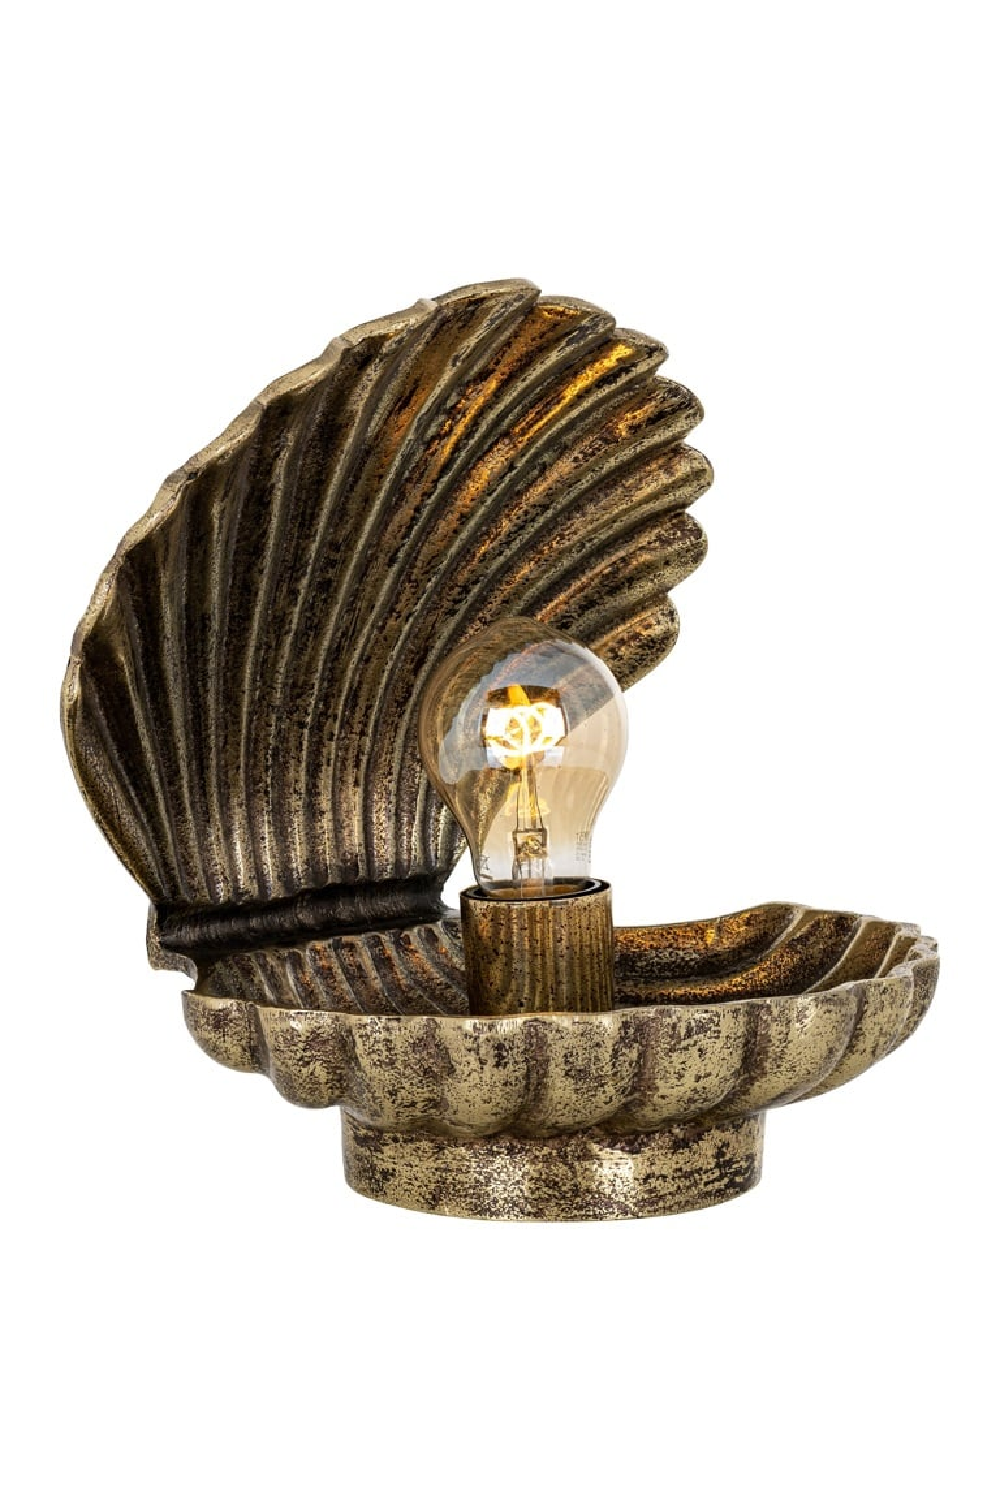 Gold Clamshell Table Lamp | OROA Stacey | Oroa.com